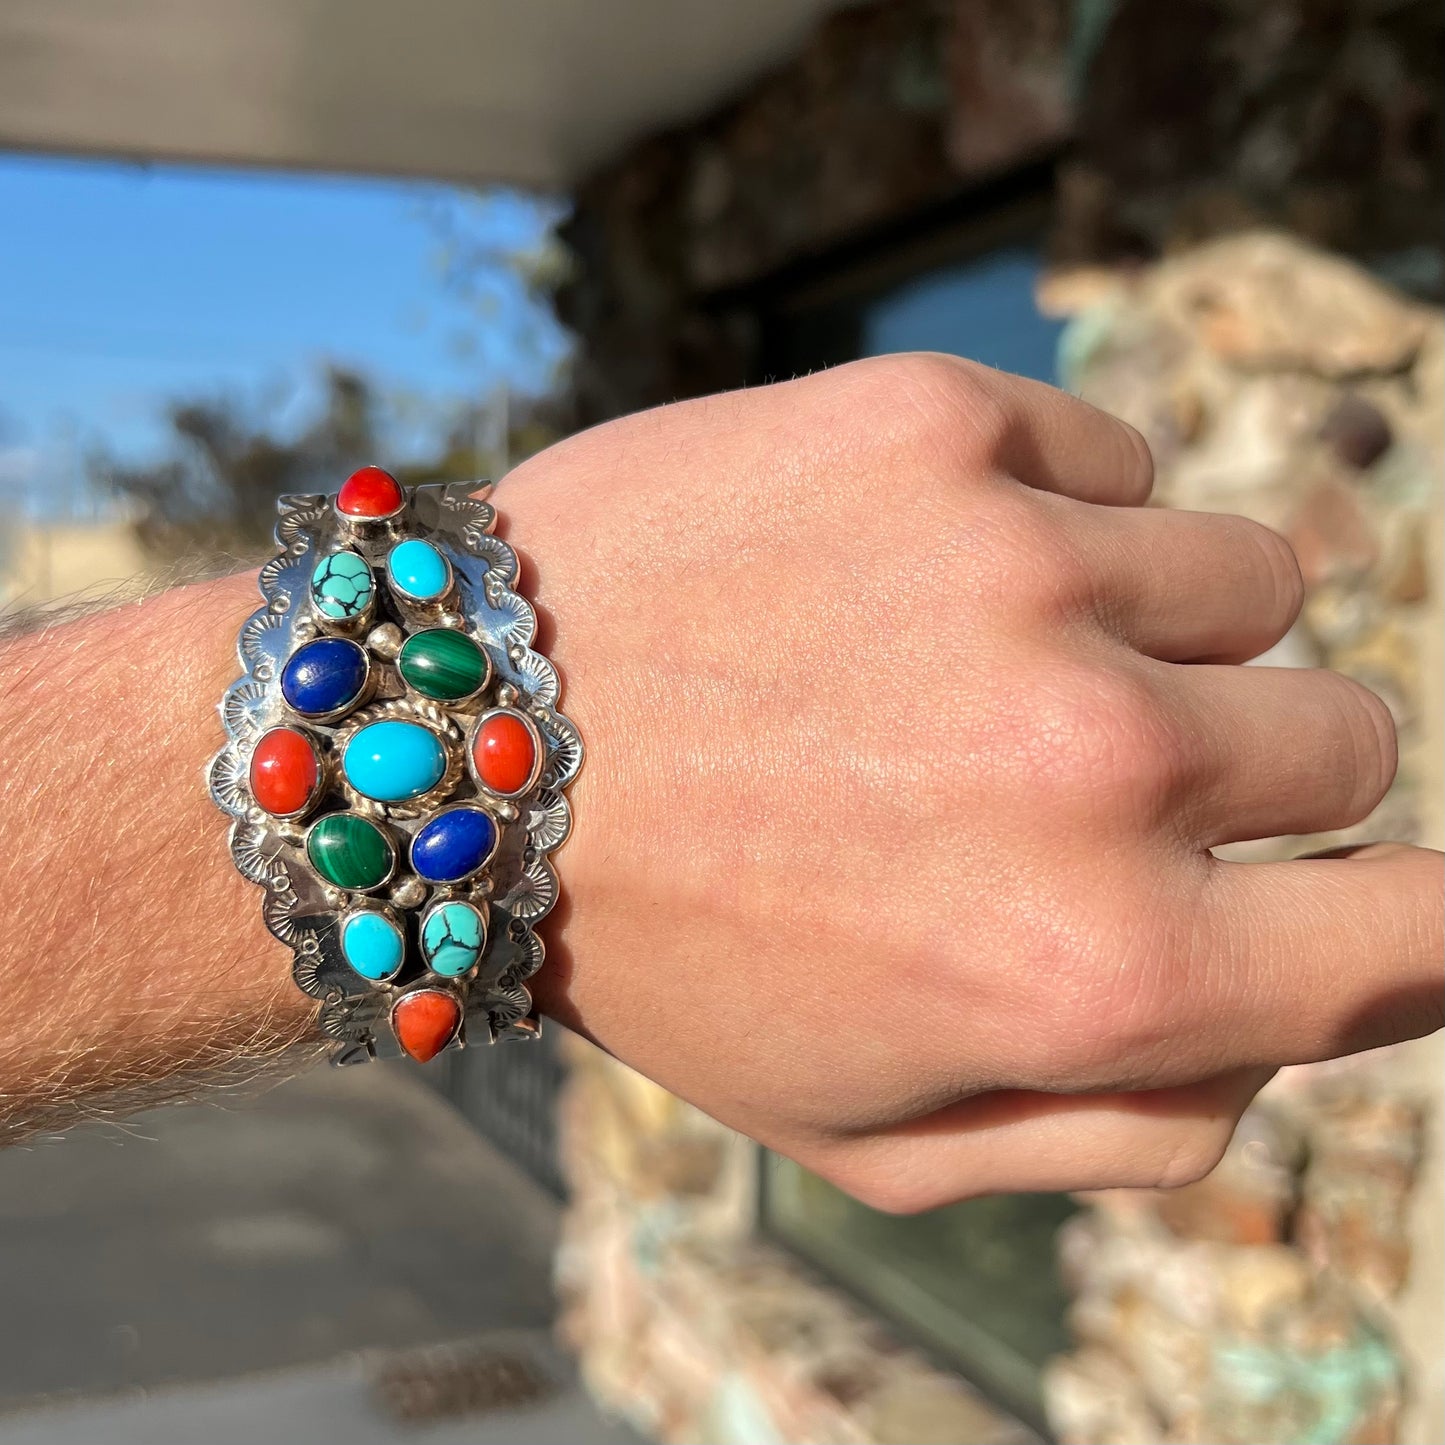 A sterling silver ladies' Navajo cuff bracelet set with turquoise, malachite, lapis lazuli, and coral stones.